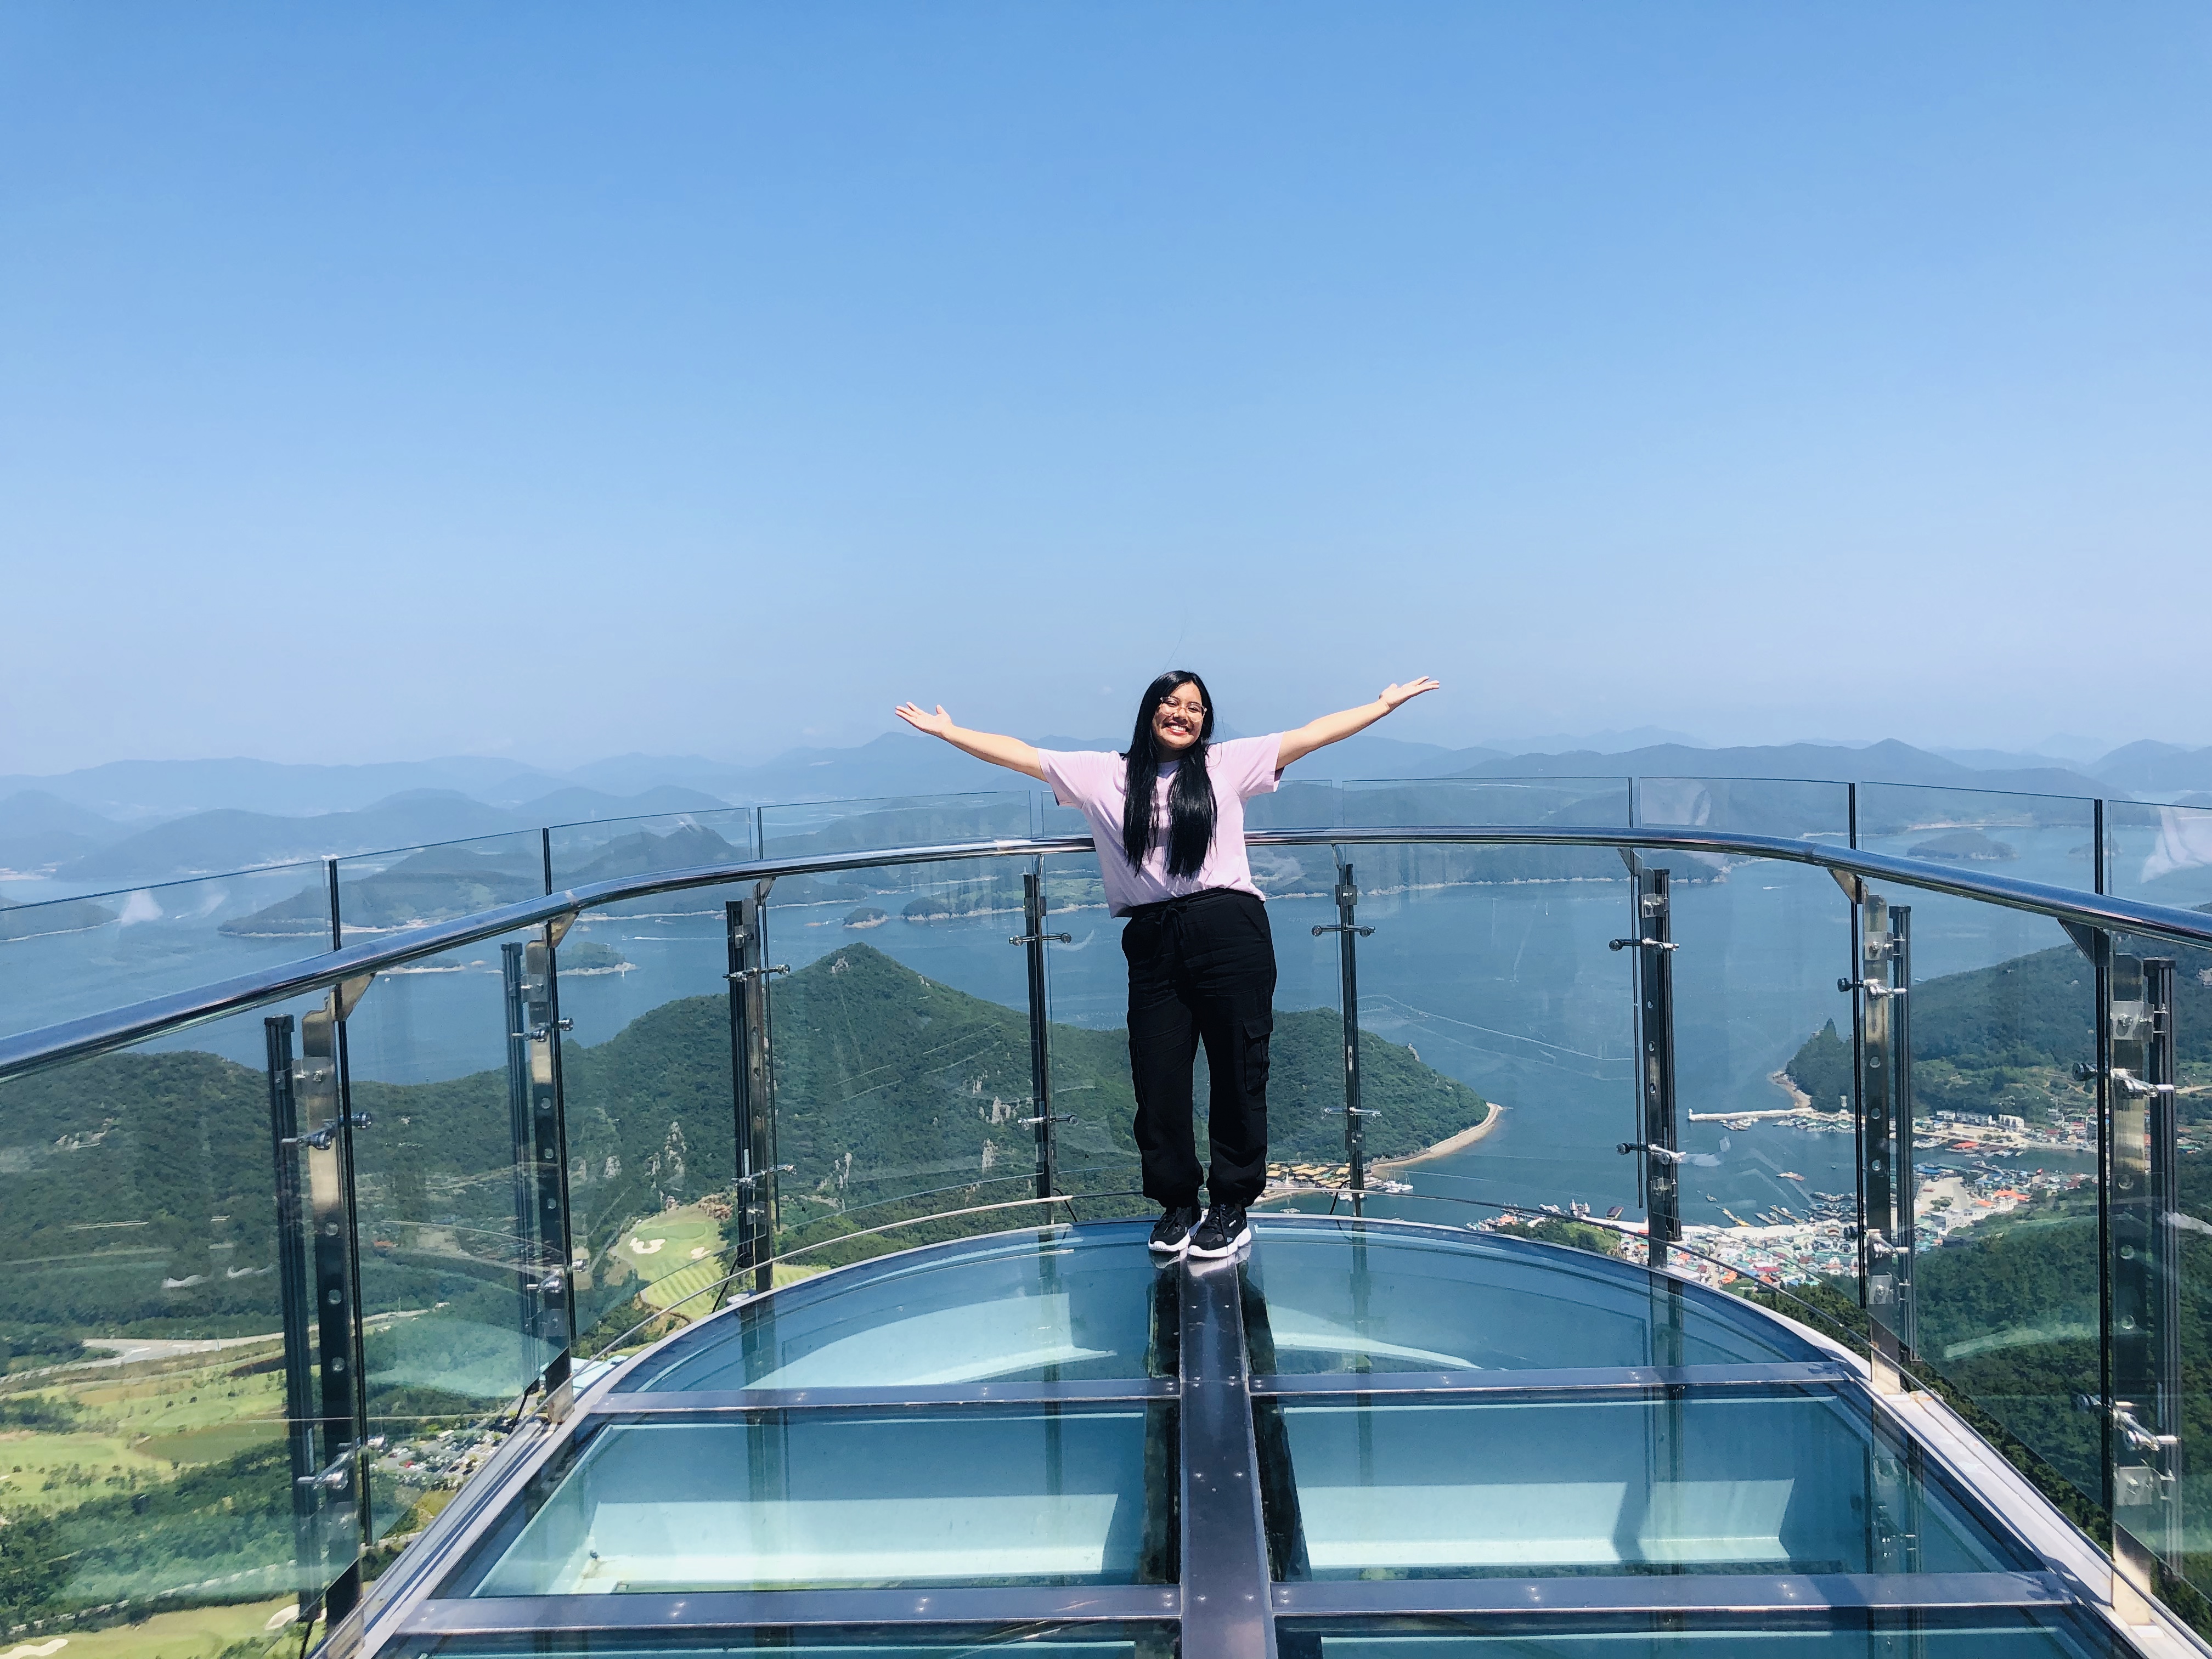 Amber Cabrera studying abroad at a viewing spot in South Korea